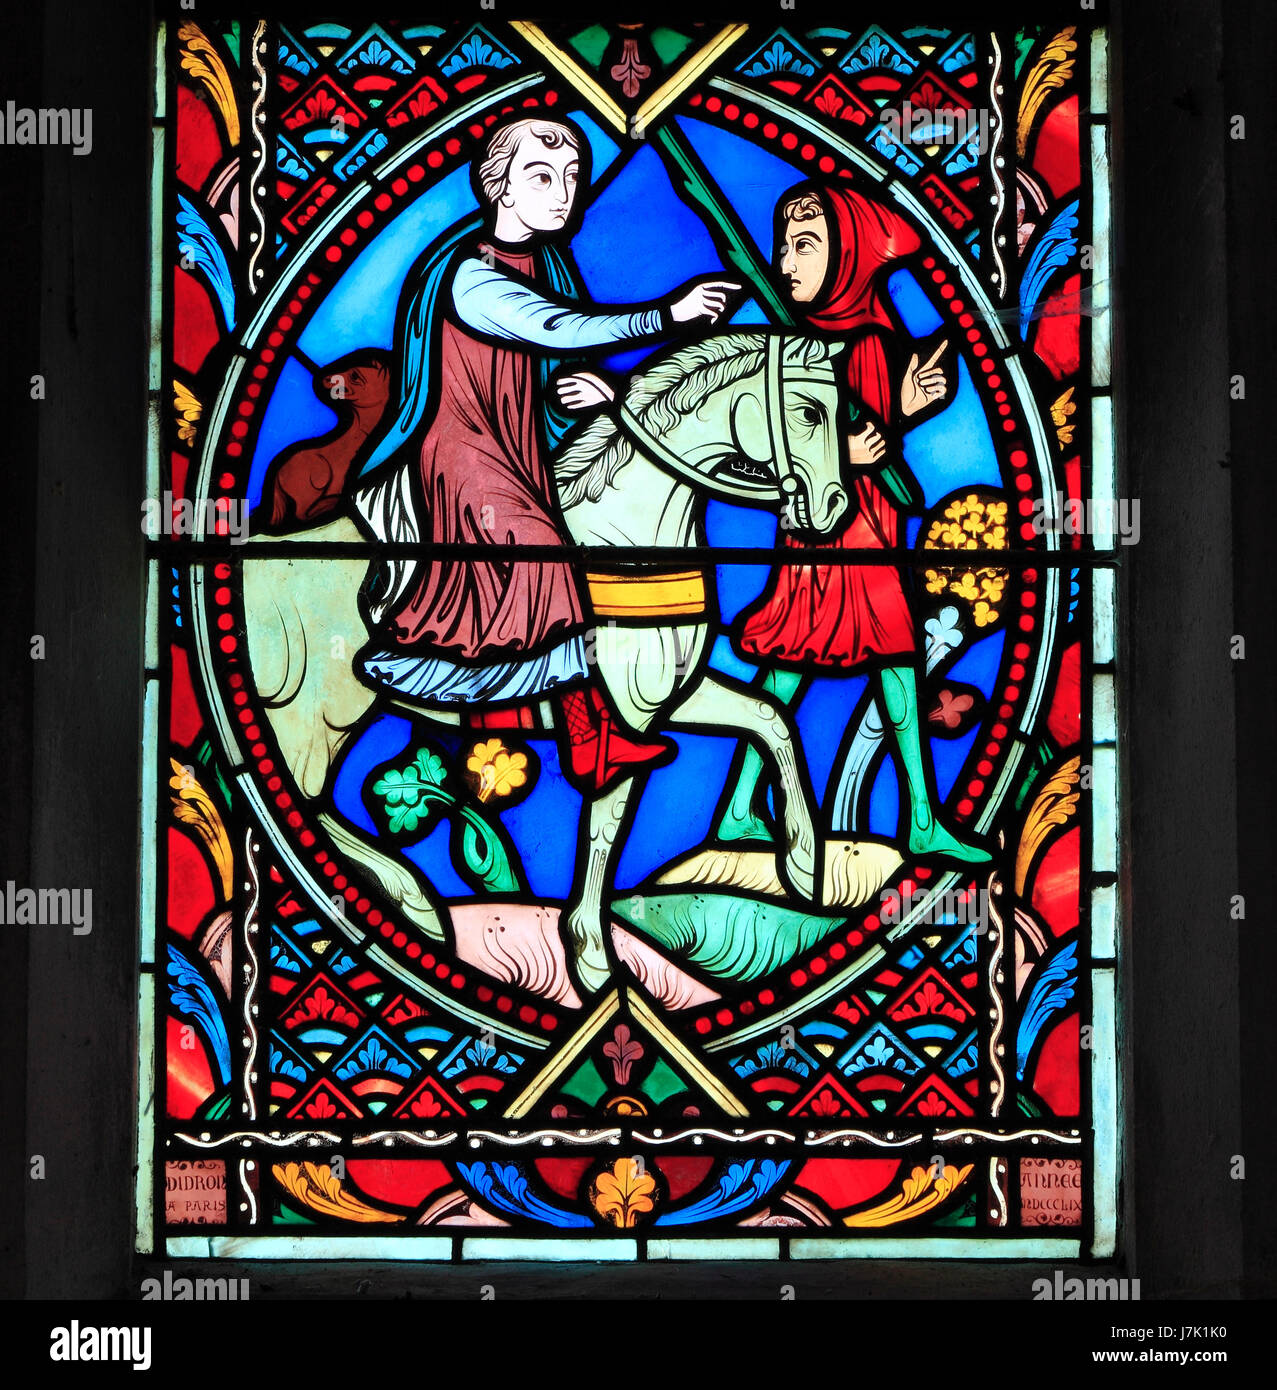 Parable of The Prodigal Son, by Didron of Paris, 1859.  Stained glass window, Feltwell Church, Norfolk, England, Prodigal Son rides to distant land Stock Photo